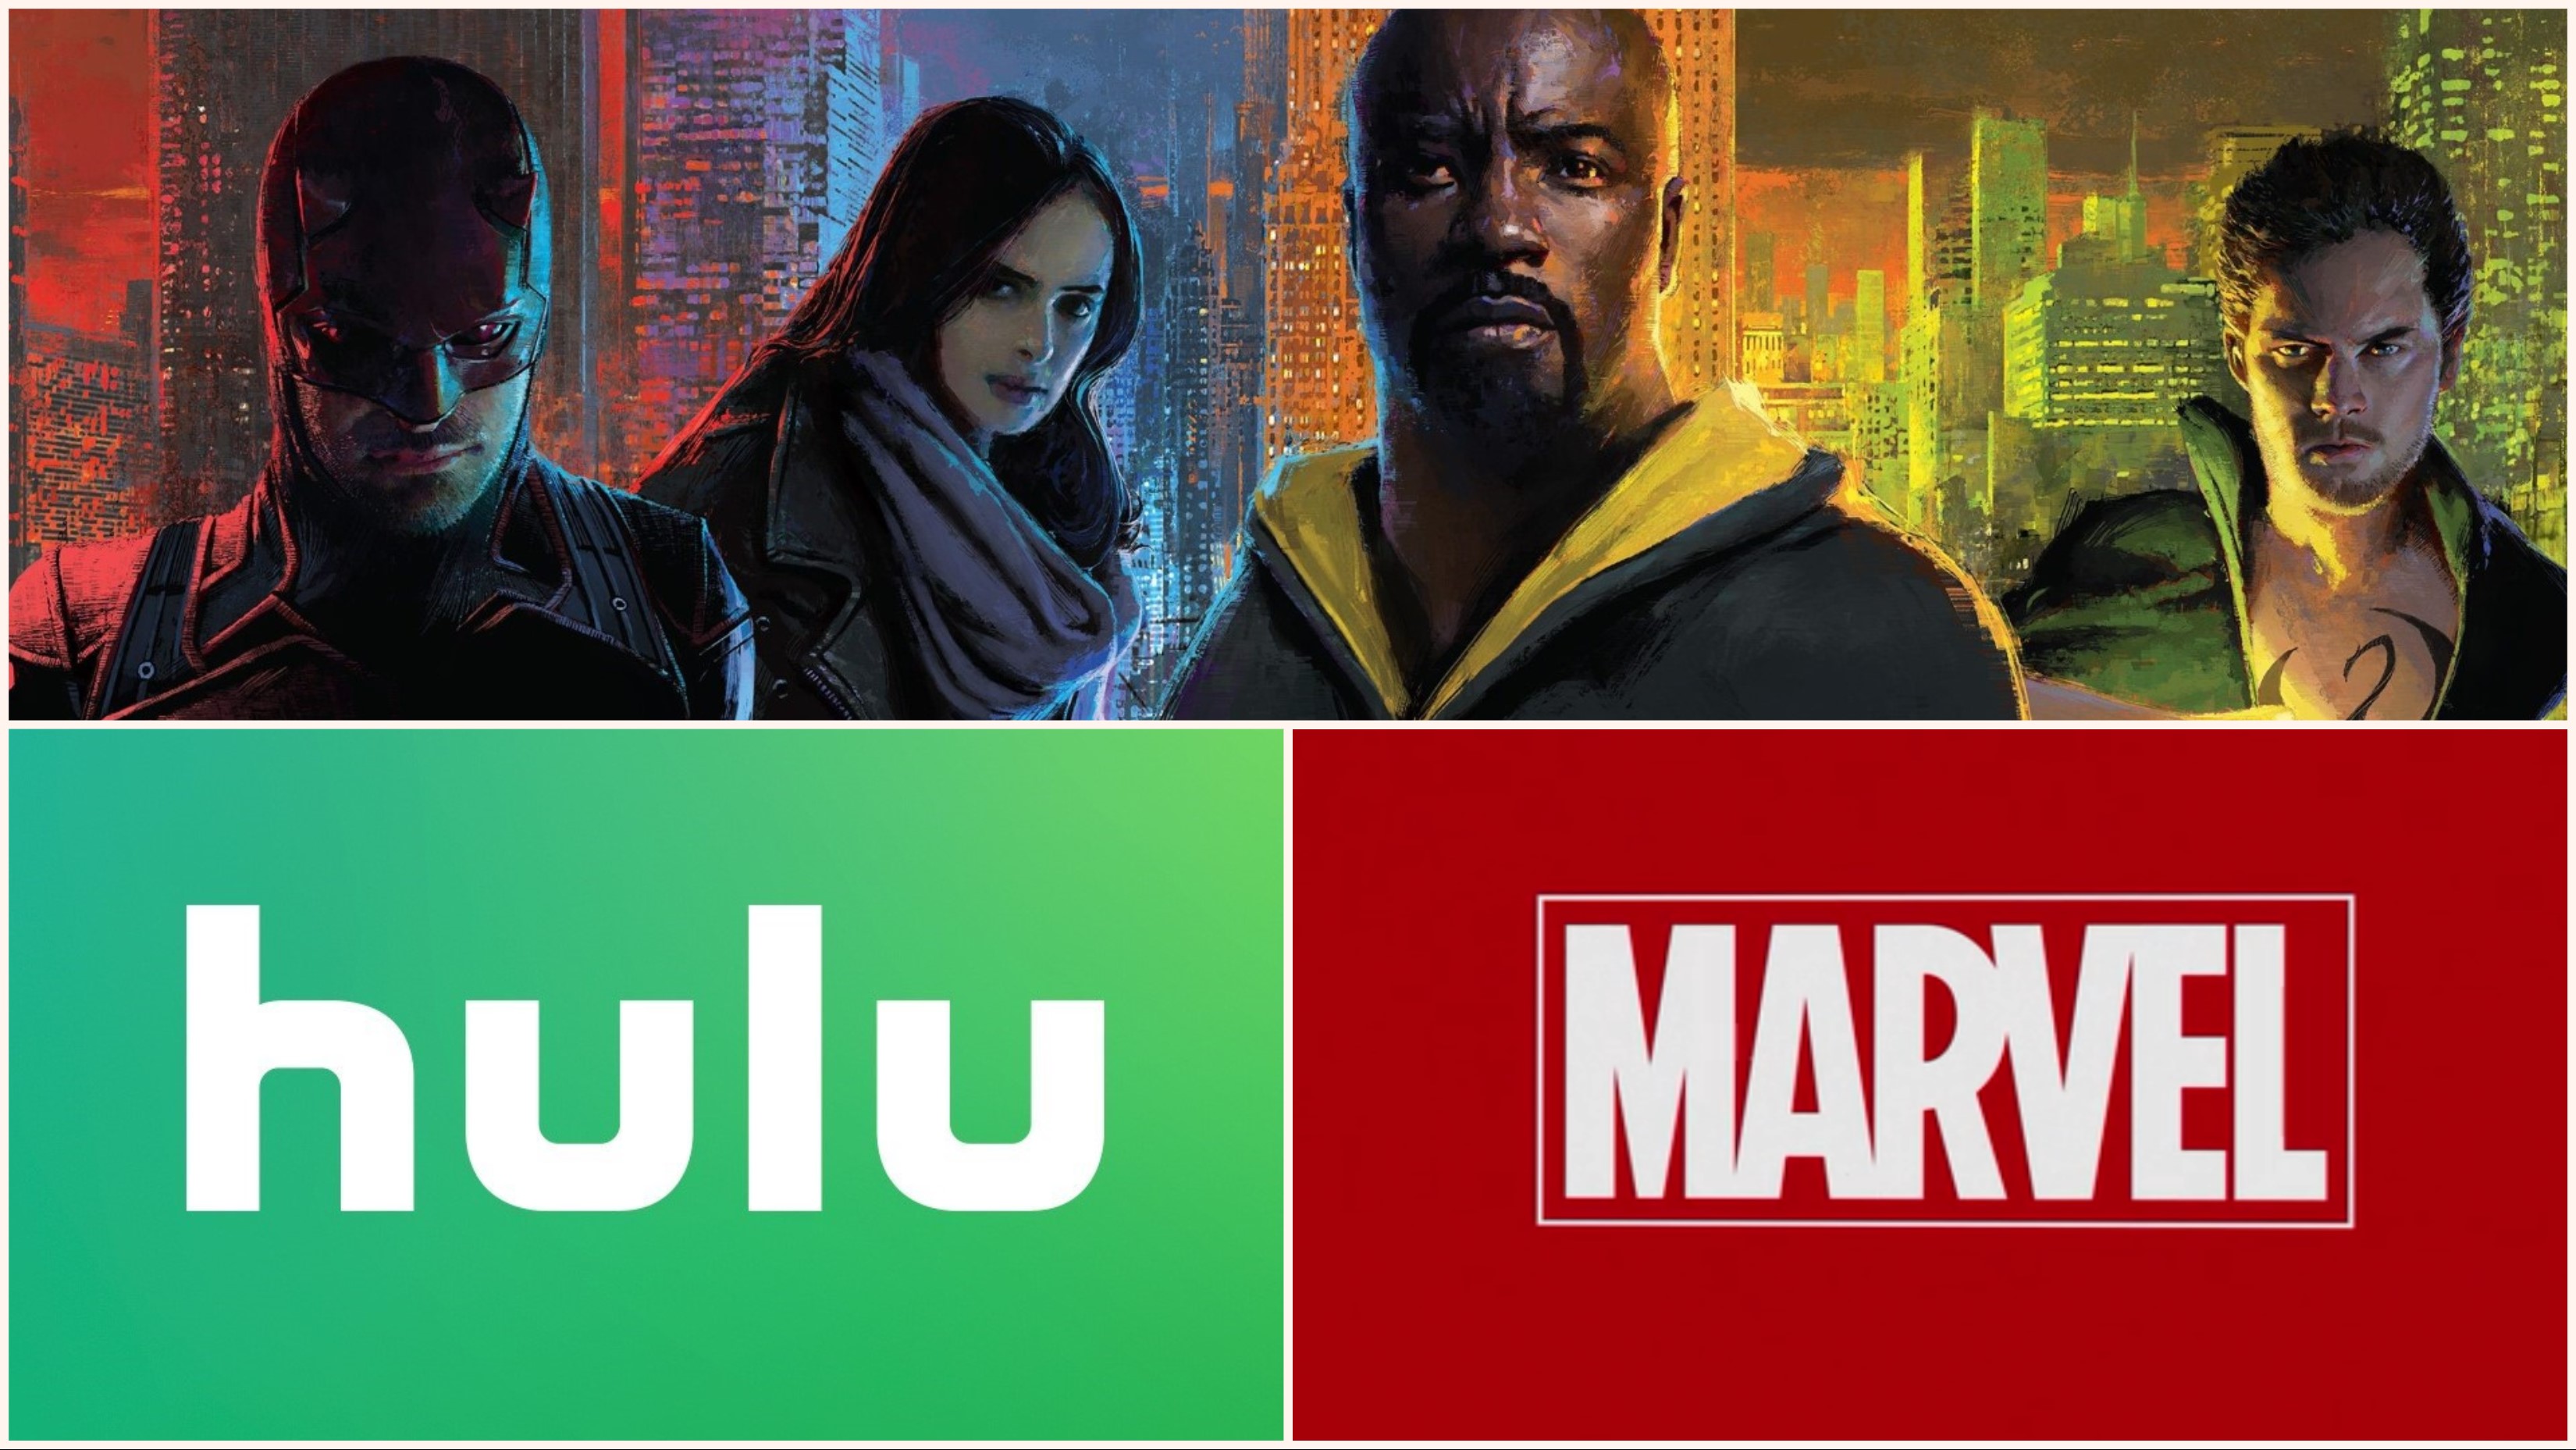 Hulu has expressed an interest in bringing back cancelled Marvel shows like Daredevil, Luke Cage, and Iron Fist to their platform.